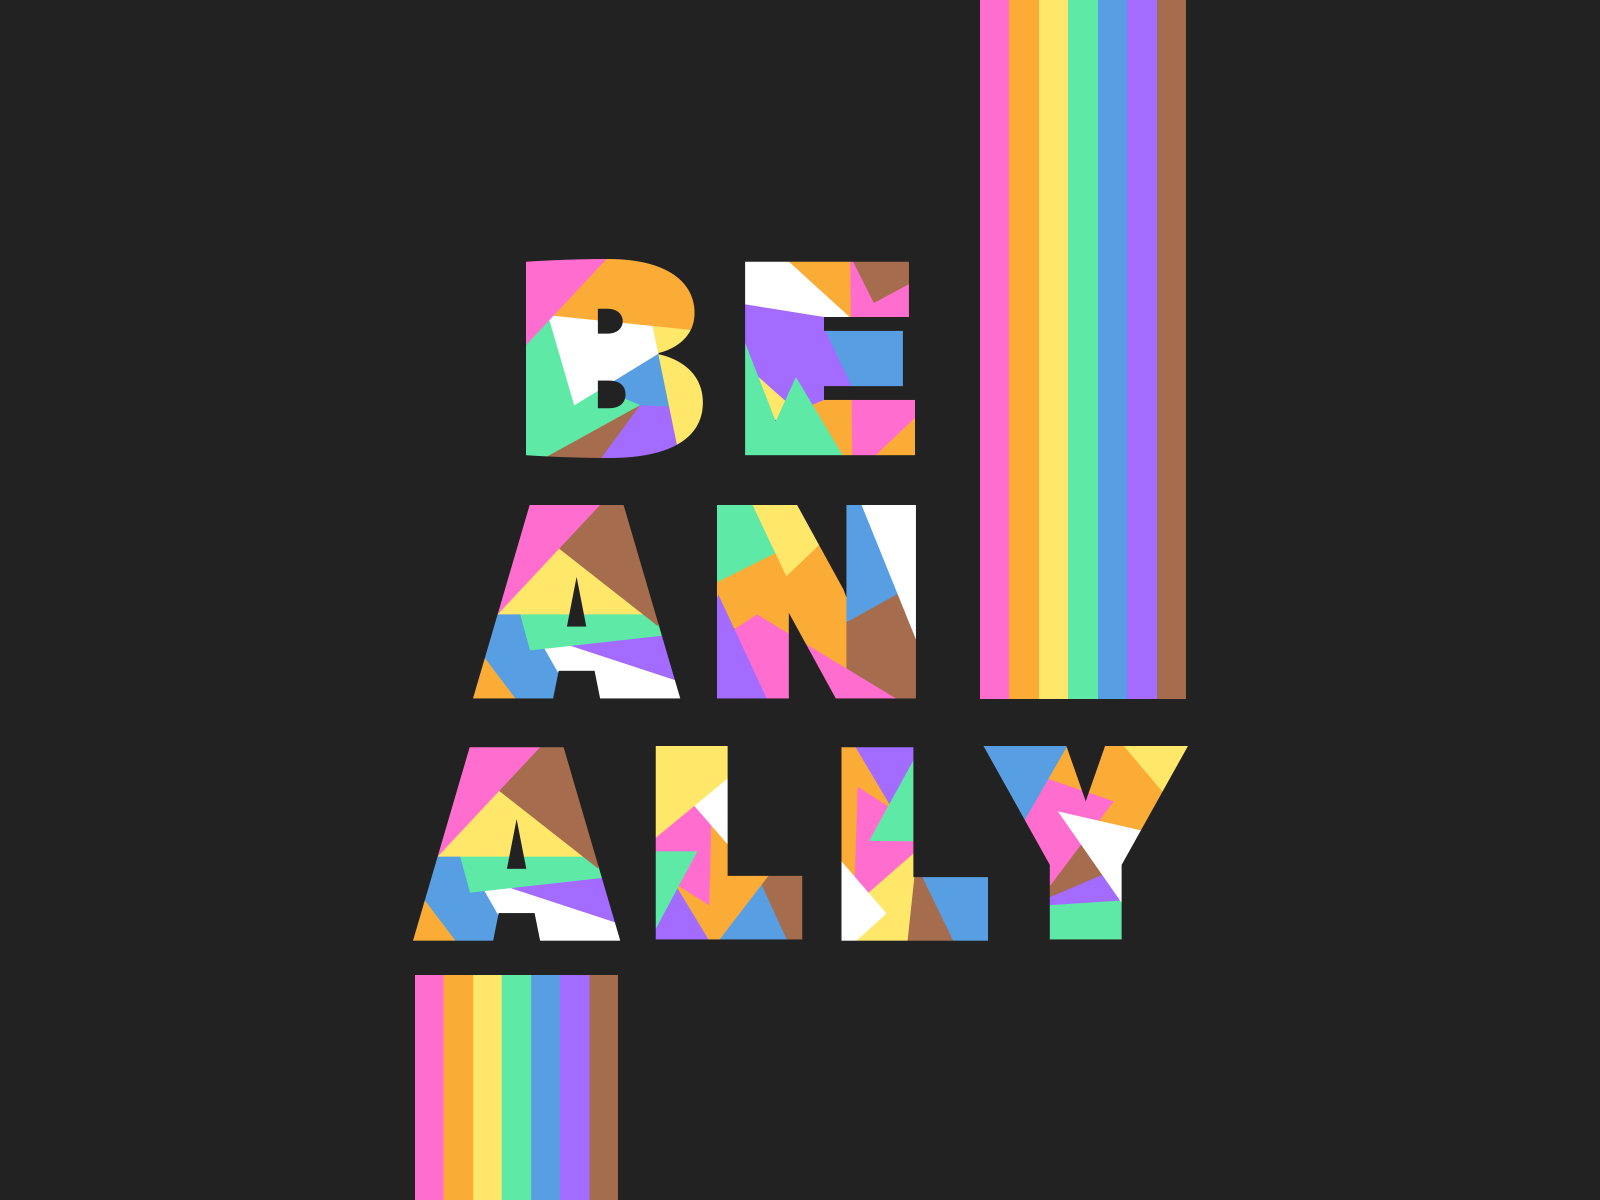 Be an ally by Danielle Chandler on Dribbble